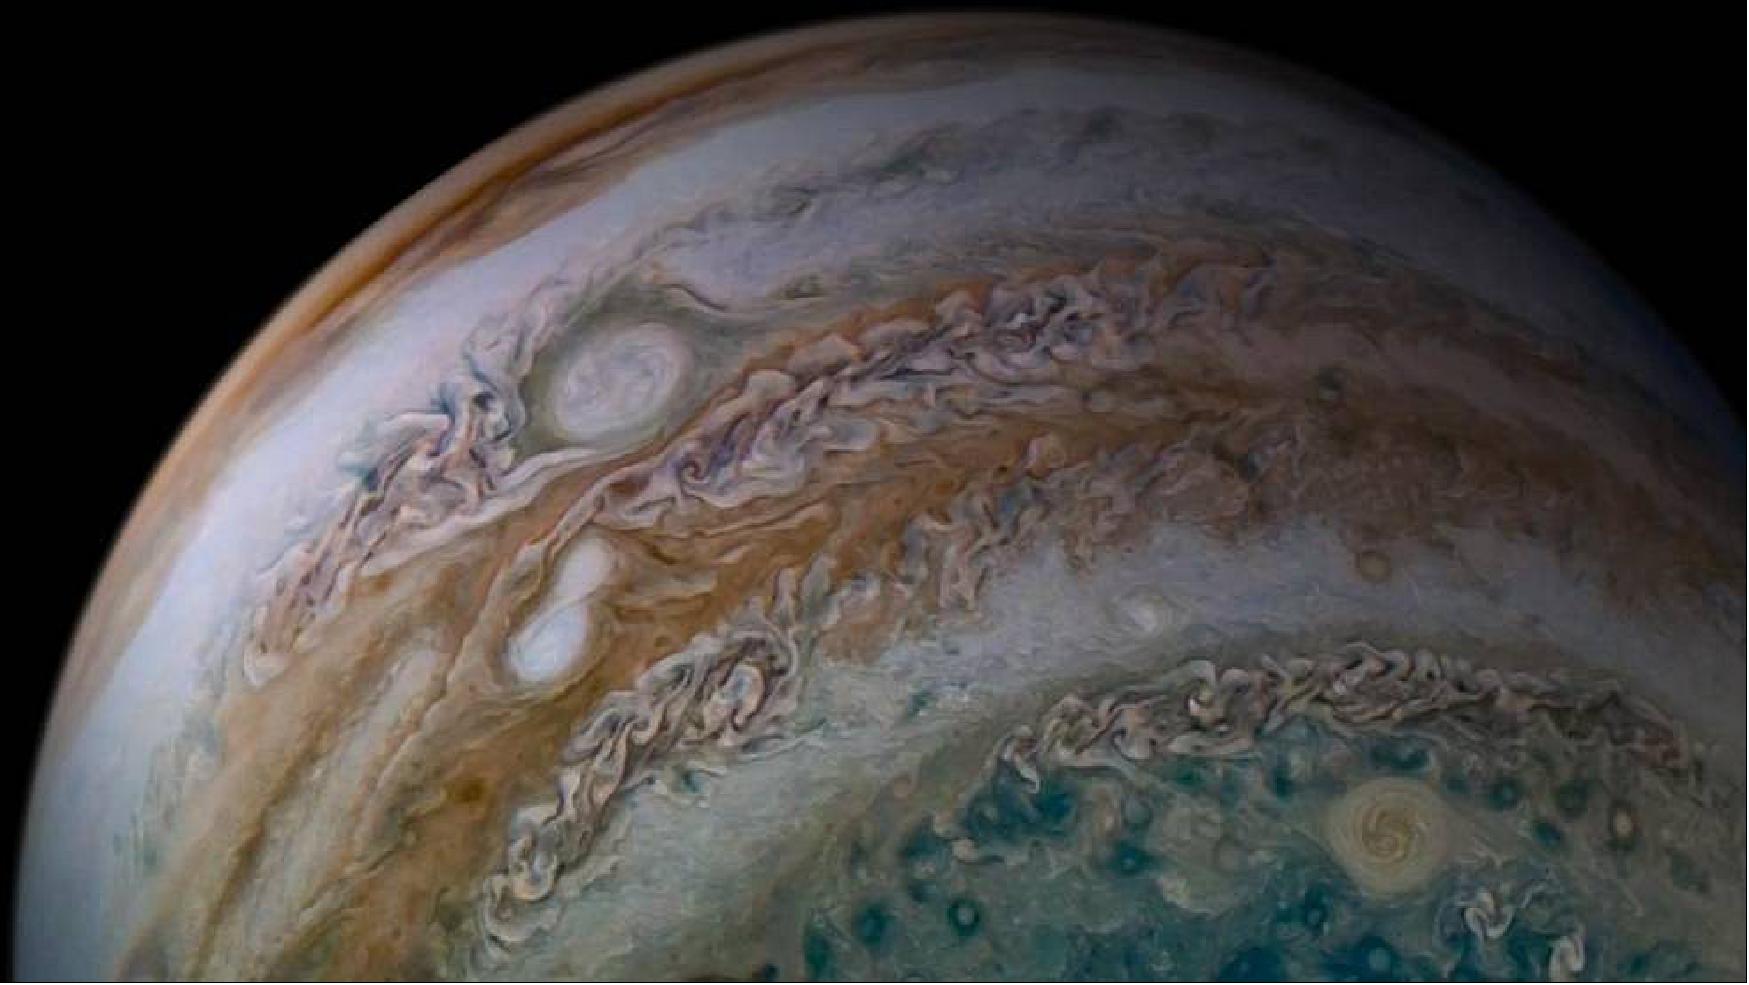 Figure 23: This view from the JunoCam imager on NASA's Juno spacecraft shows two storms merging. The two white ovals seen within the orange-colored band left of center are anticyclonic storms – that is, storms that rotate counterclockwise. The image was taken on Dec. 26, 2019 (image credits: NASA/JPL-Caltech/SwRI/MSSS Image processing by Tanya Oleksuik, © CC BY)